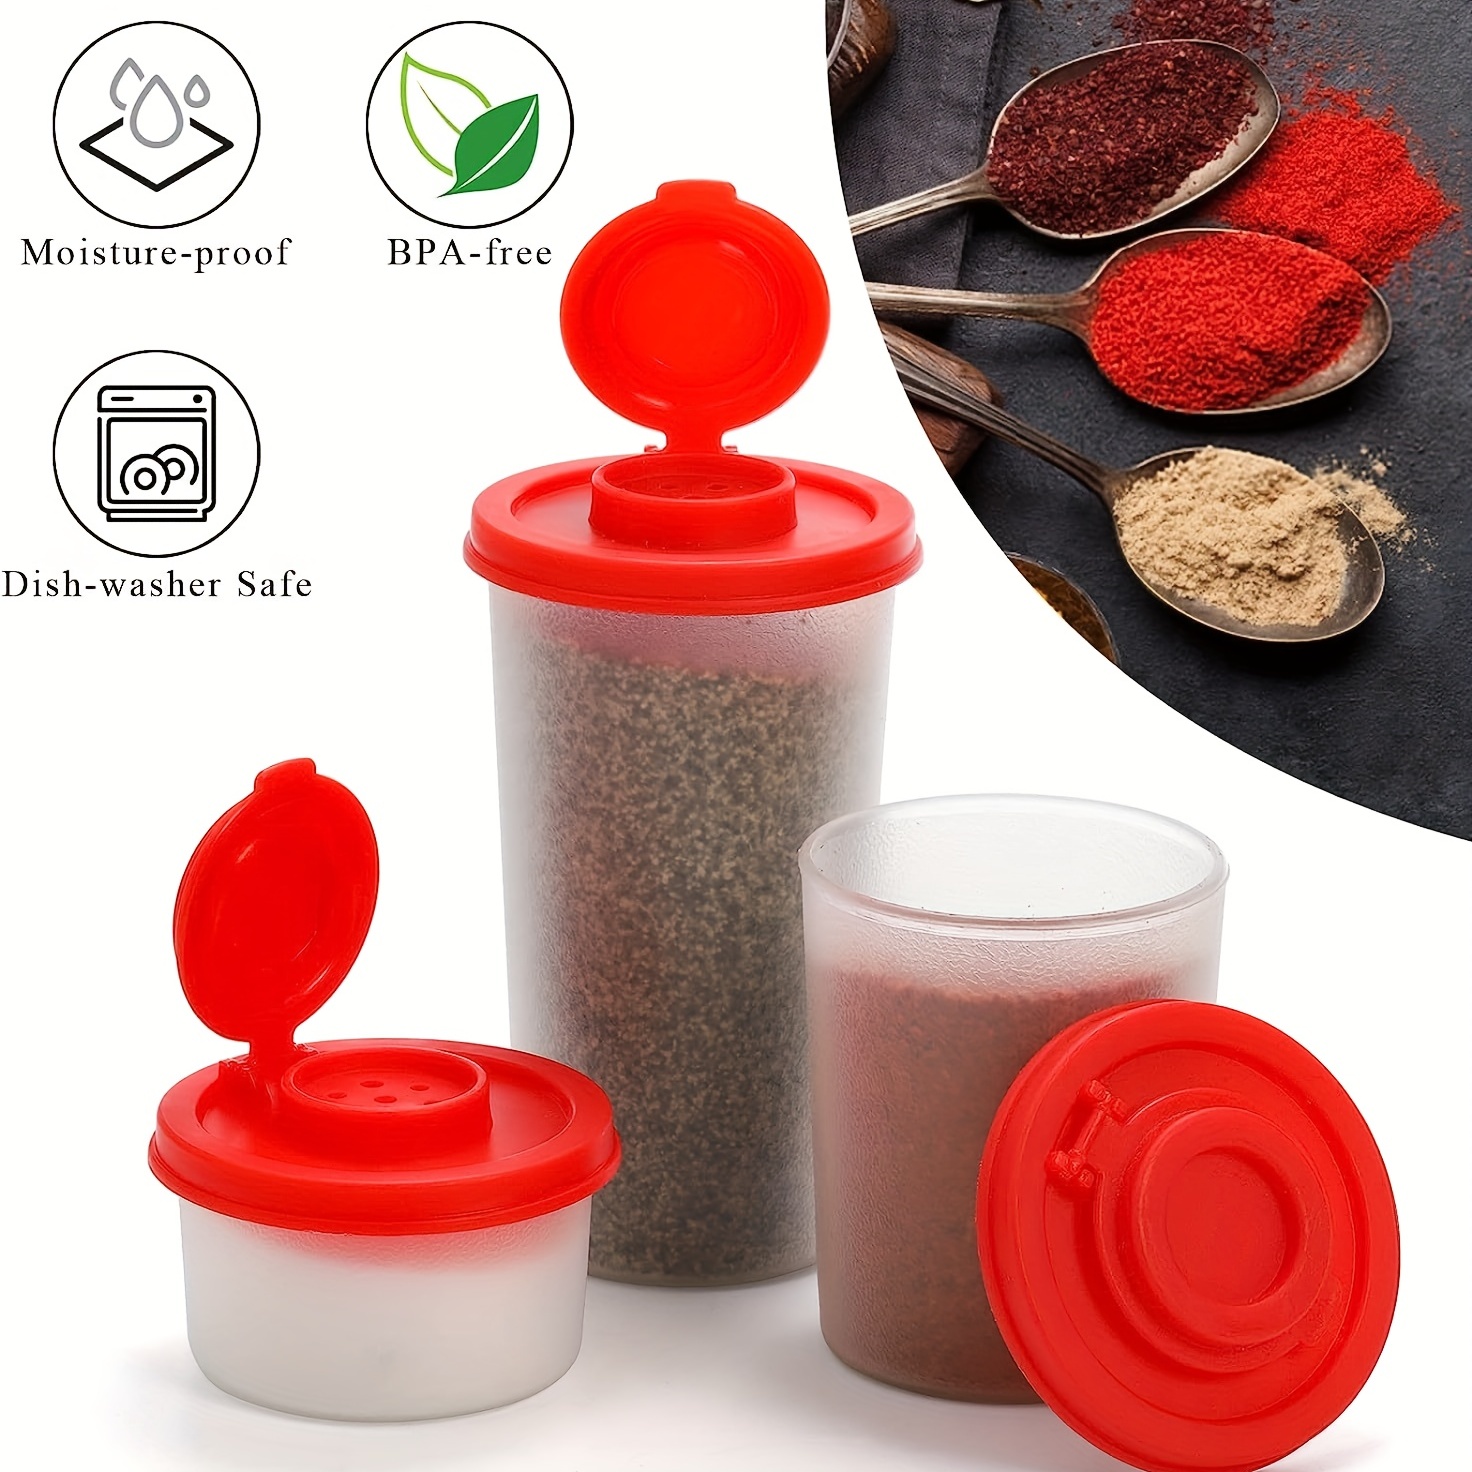 Glass Salt and Pepper Shakers- Moisture Proof Salt Shaker with Plastic Lid  - Refillable Spice Dispenser for Kitchen or Travel - Cute Seasoning Shakers